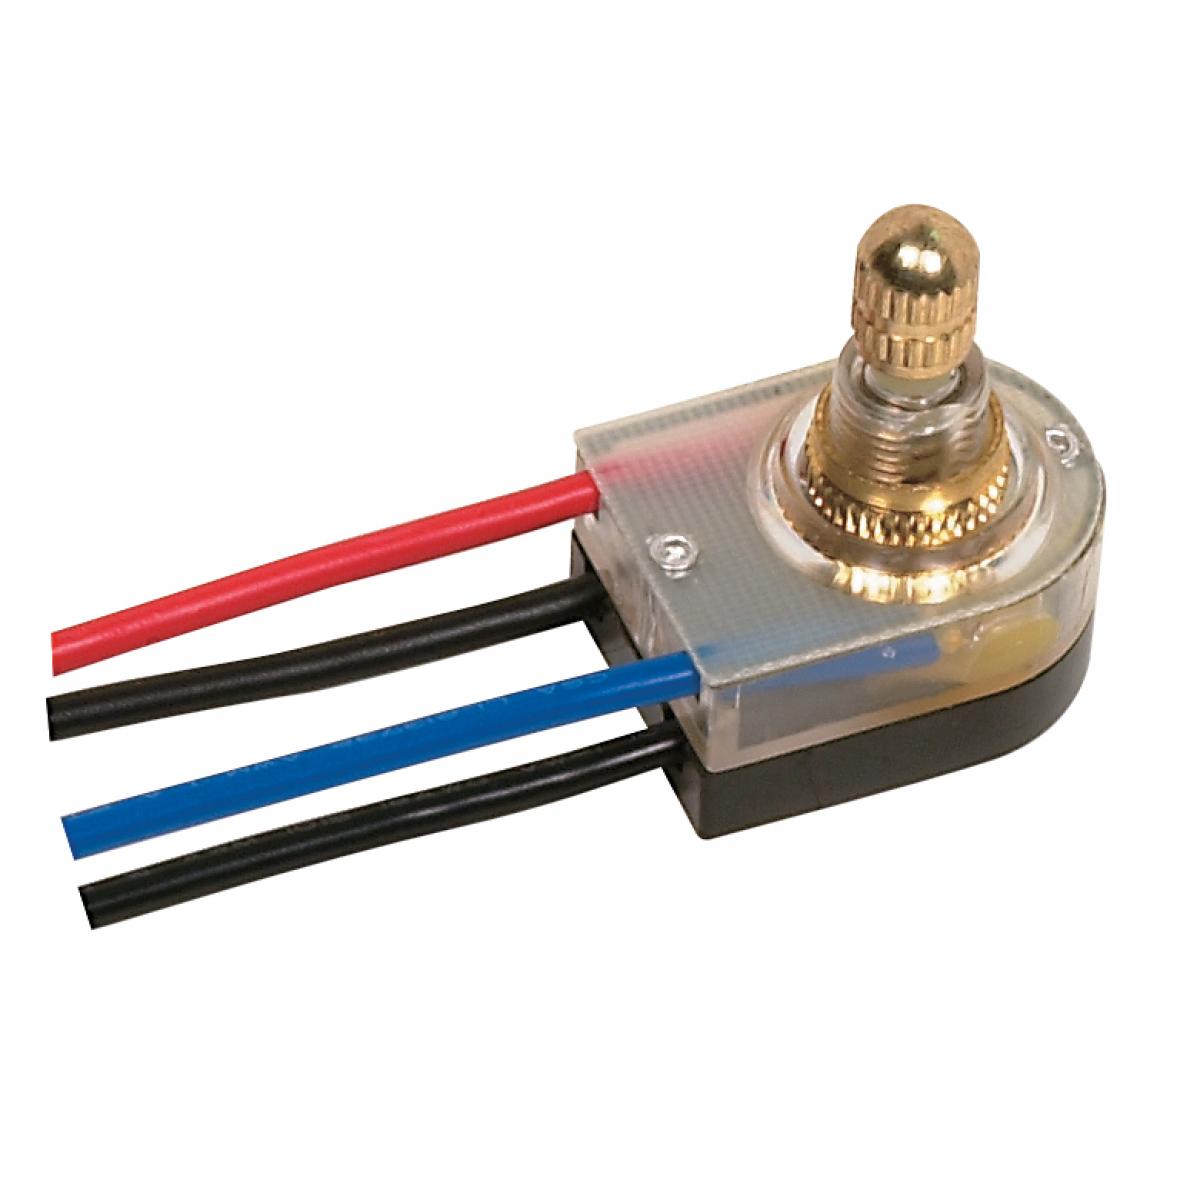 Satco 80-1359 On-Off Lighted Rotary Switch 3/8" Plastic Bushing Single Circuit 6A-125V, 3A-250V Rating 6" Leads Brass Finish